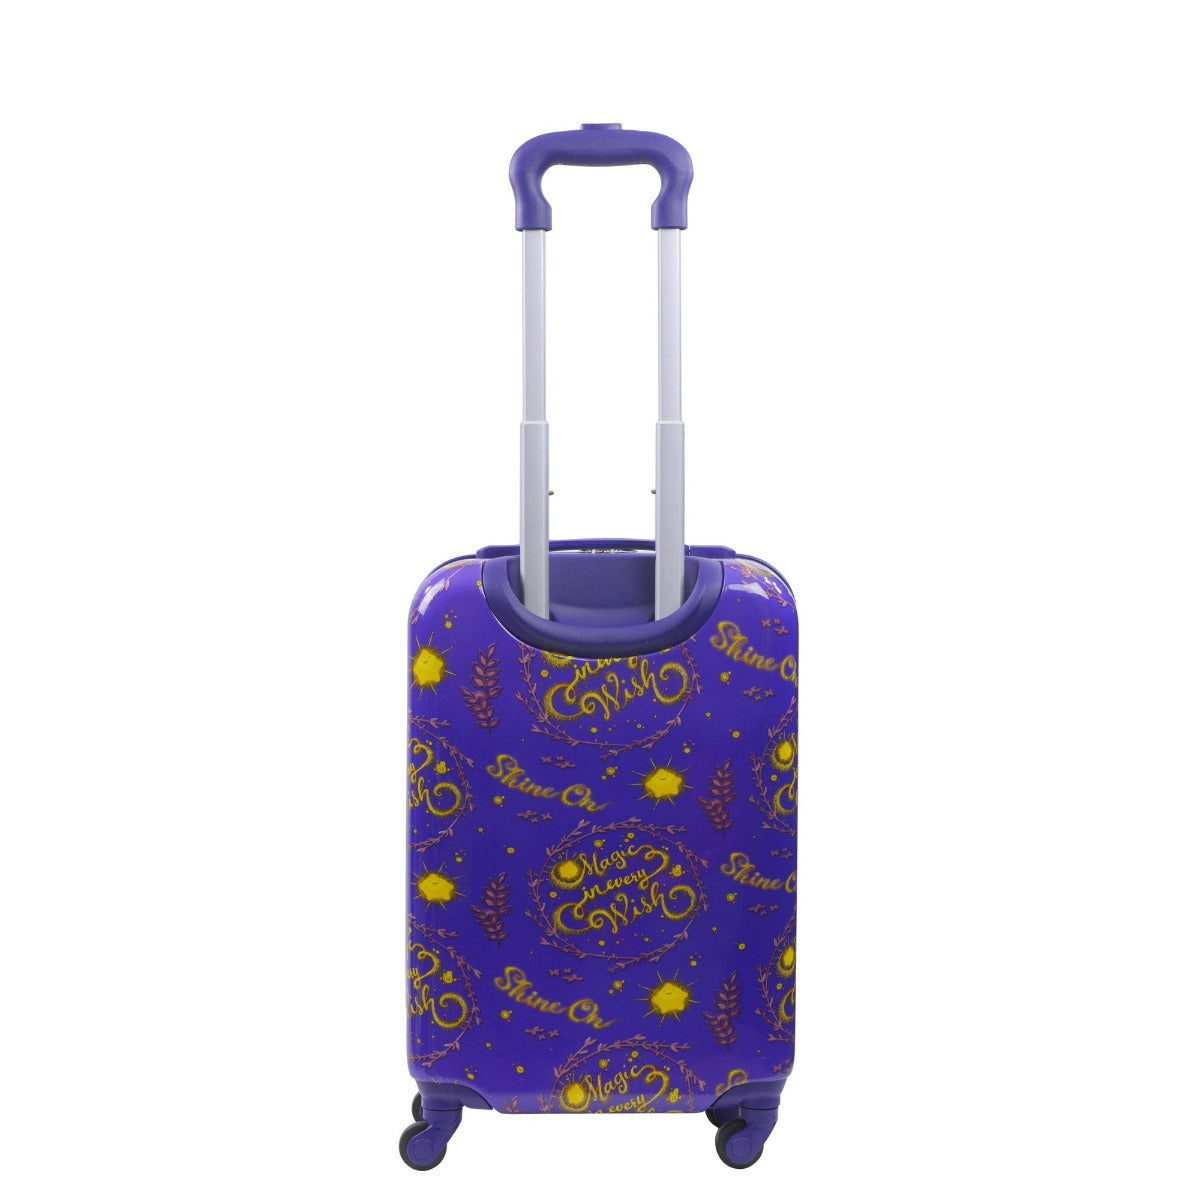 Disney Ful wish star kids 21" carry on luggage hardside spinner suitcase